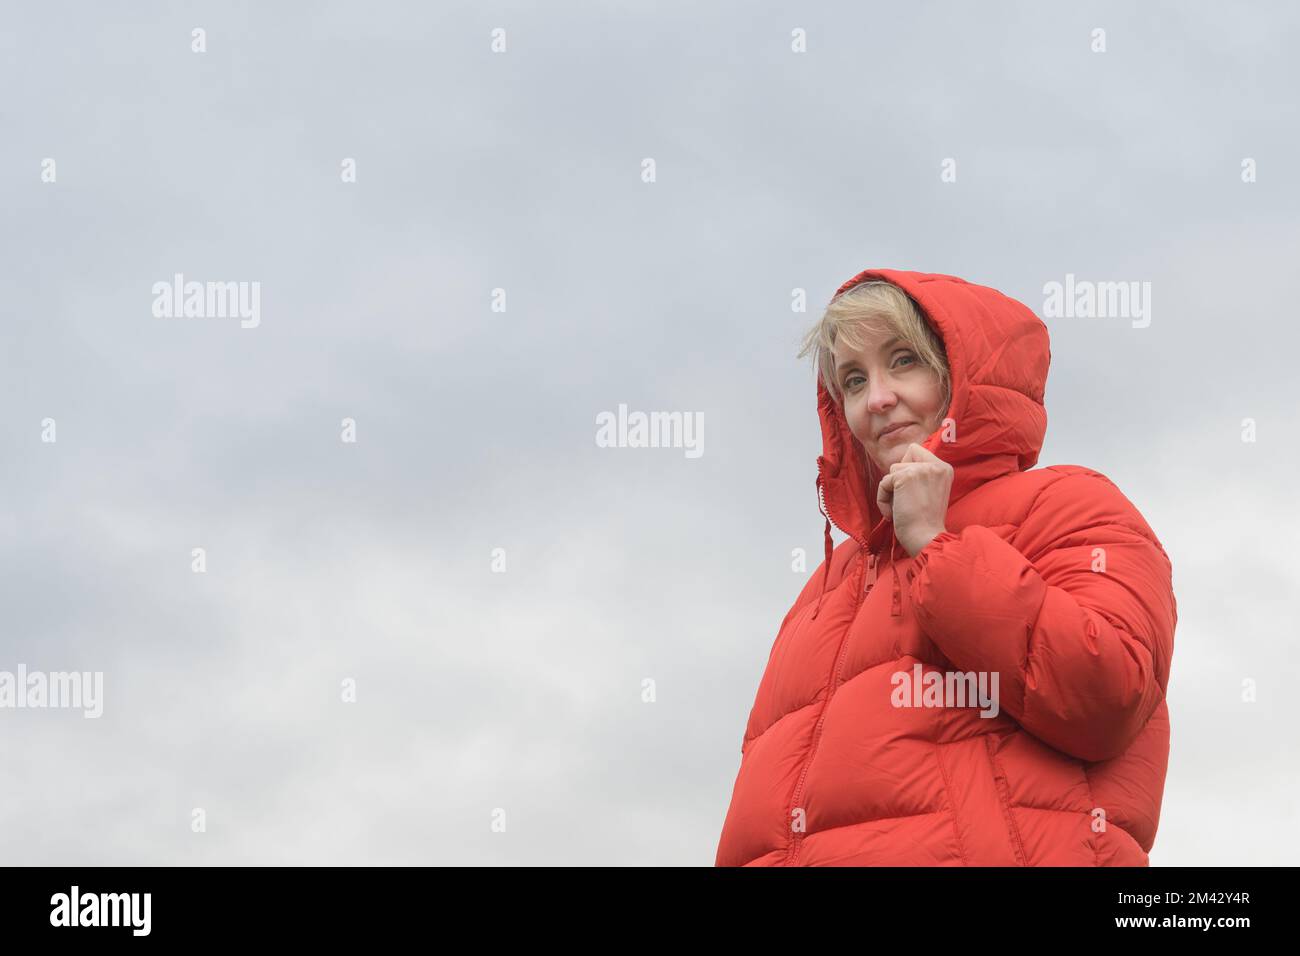 A woman in a red jacket. Portrait against a cloudy sky. copy space Stock Photo